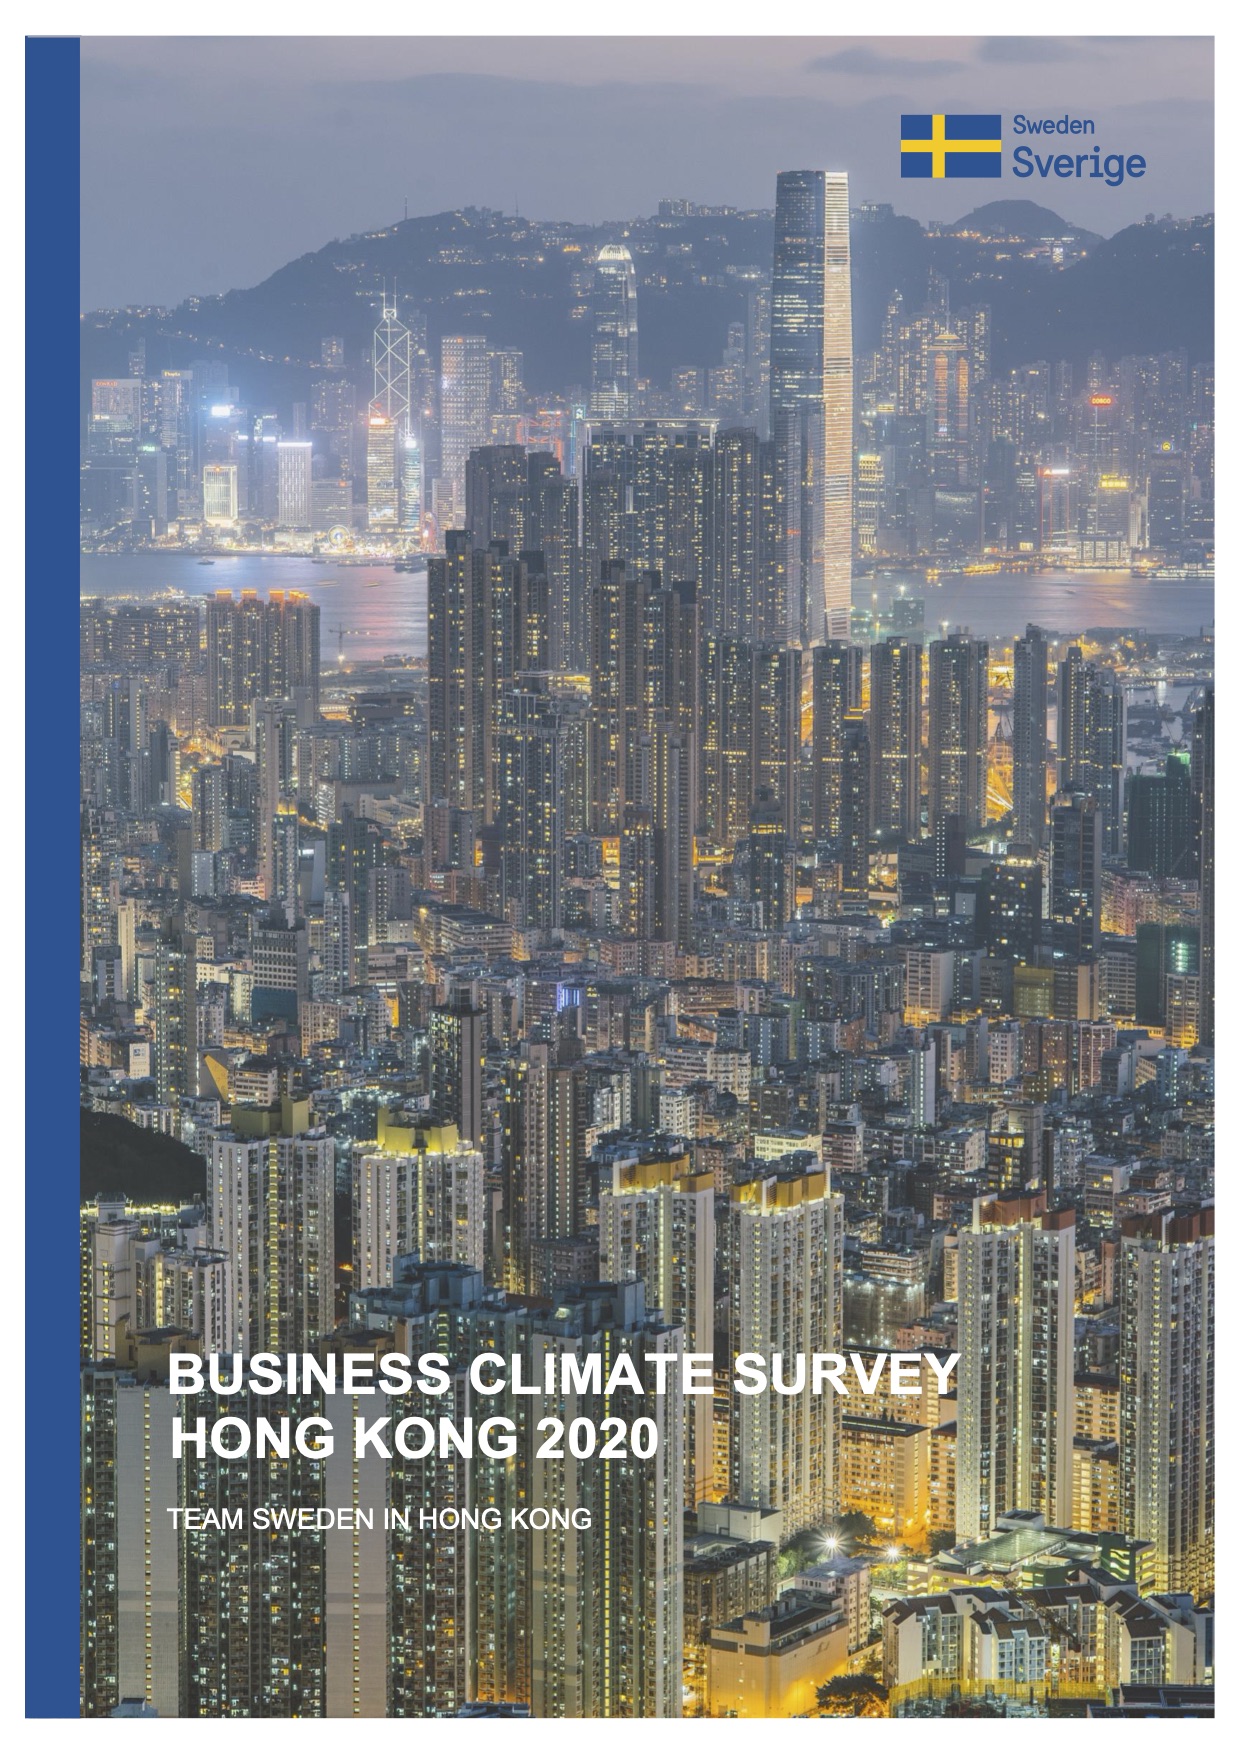 Team-Sweden-in-Hong-Kongs-Business-Climate-Survey-report-2020